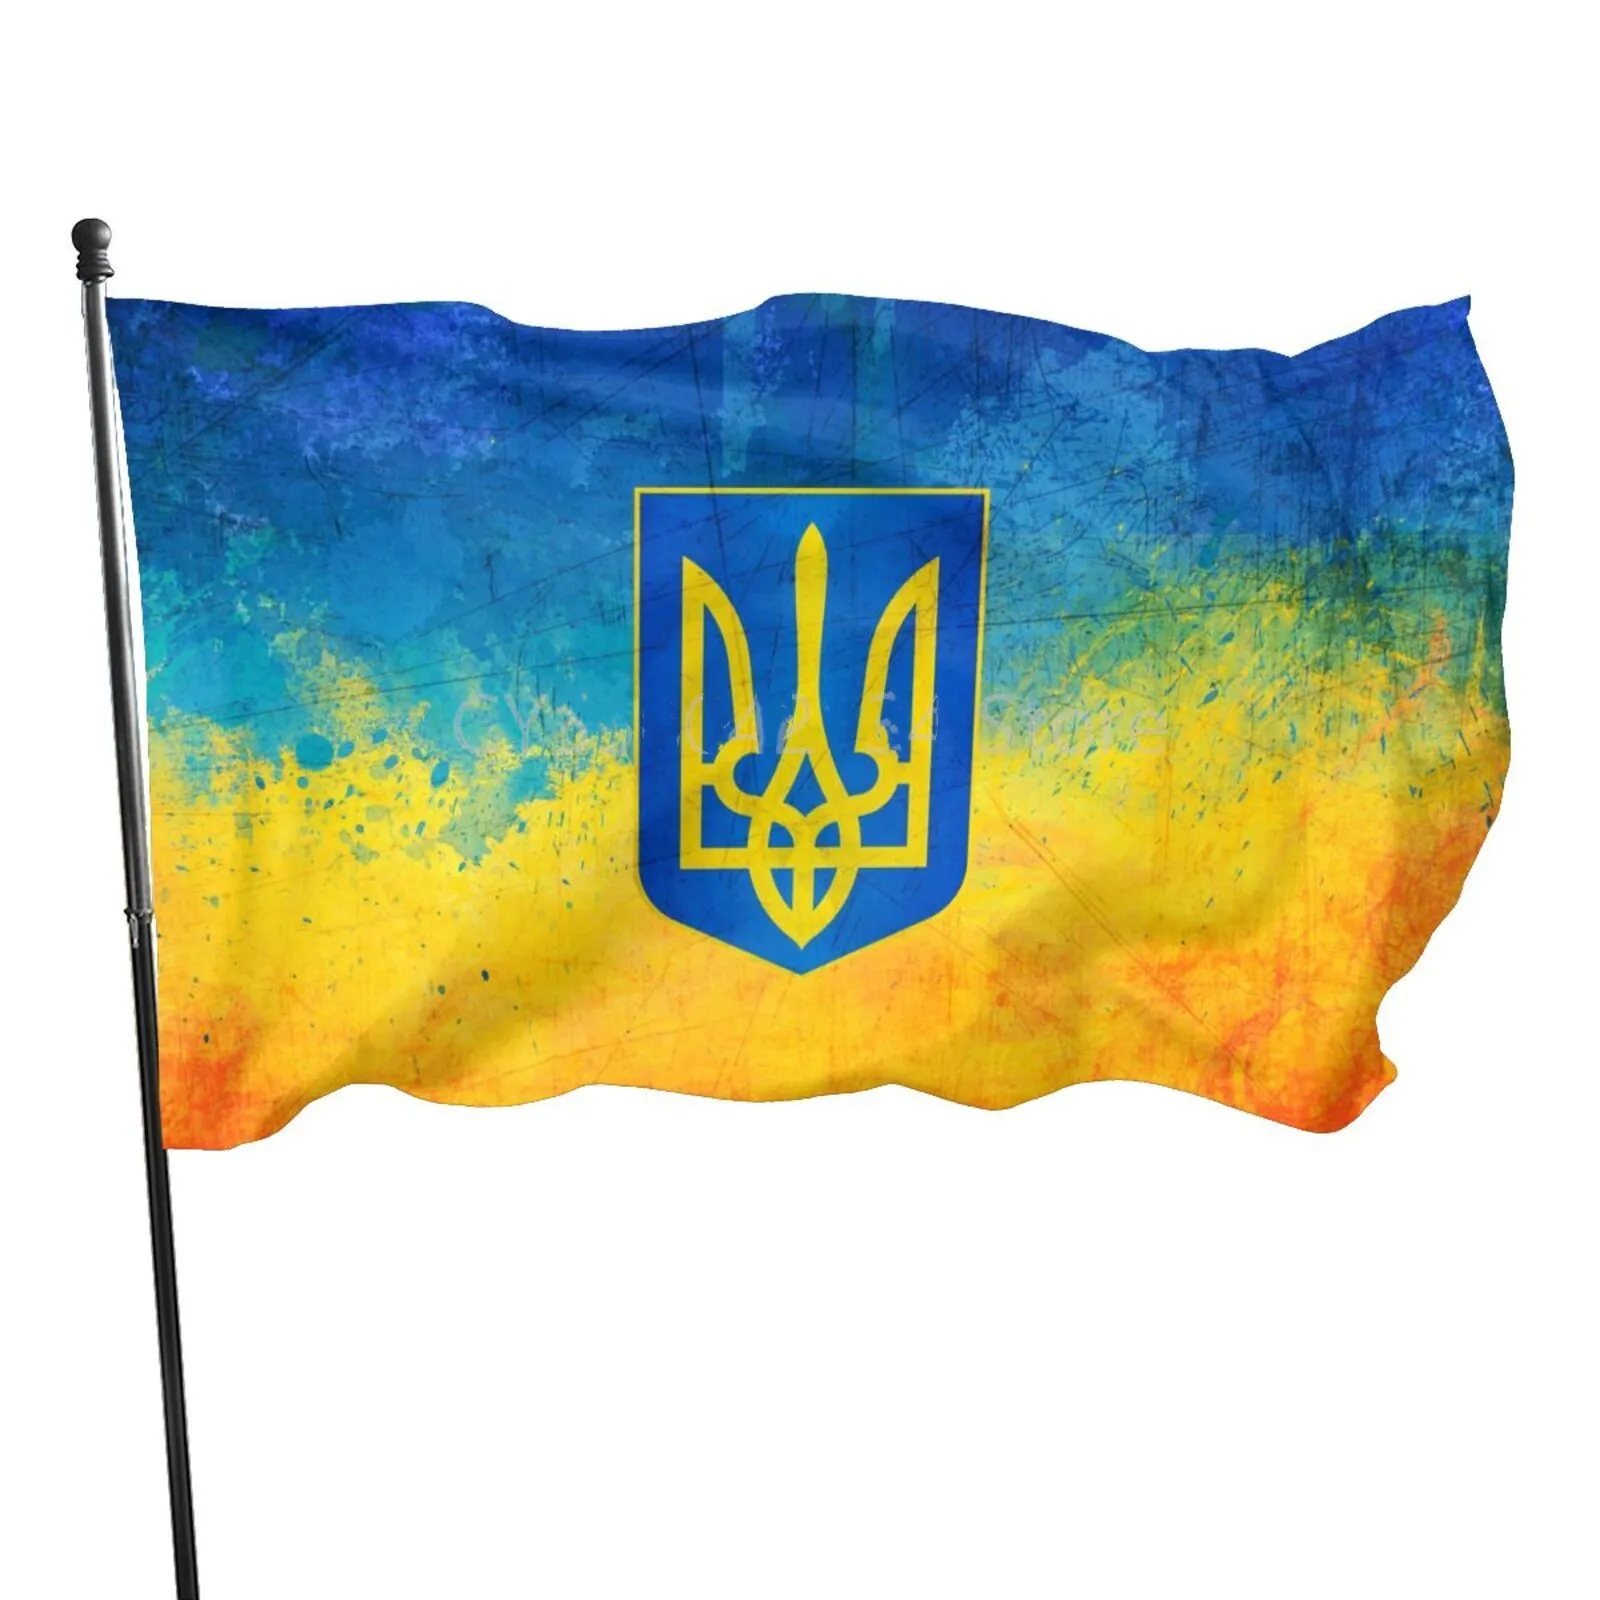 

NEW Ukraine National Flag Hanging Polyester Blue Yellow UA UKR Ukrainian National Flags for Indoor and Outdoor Decoration Gifts